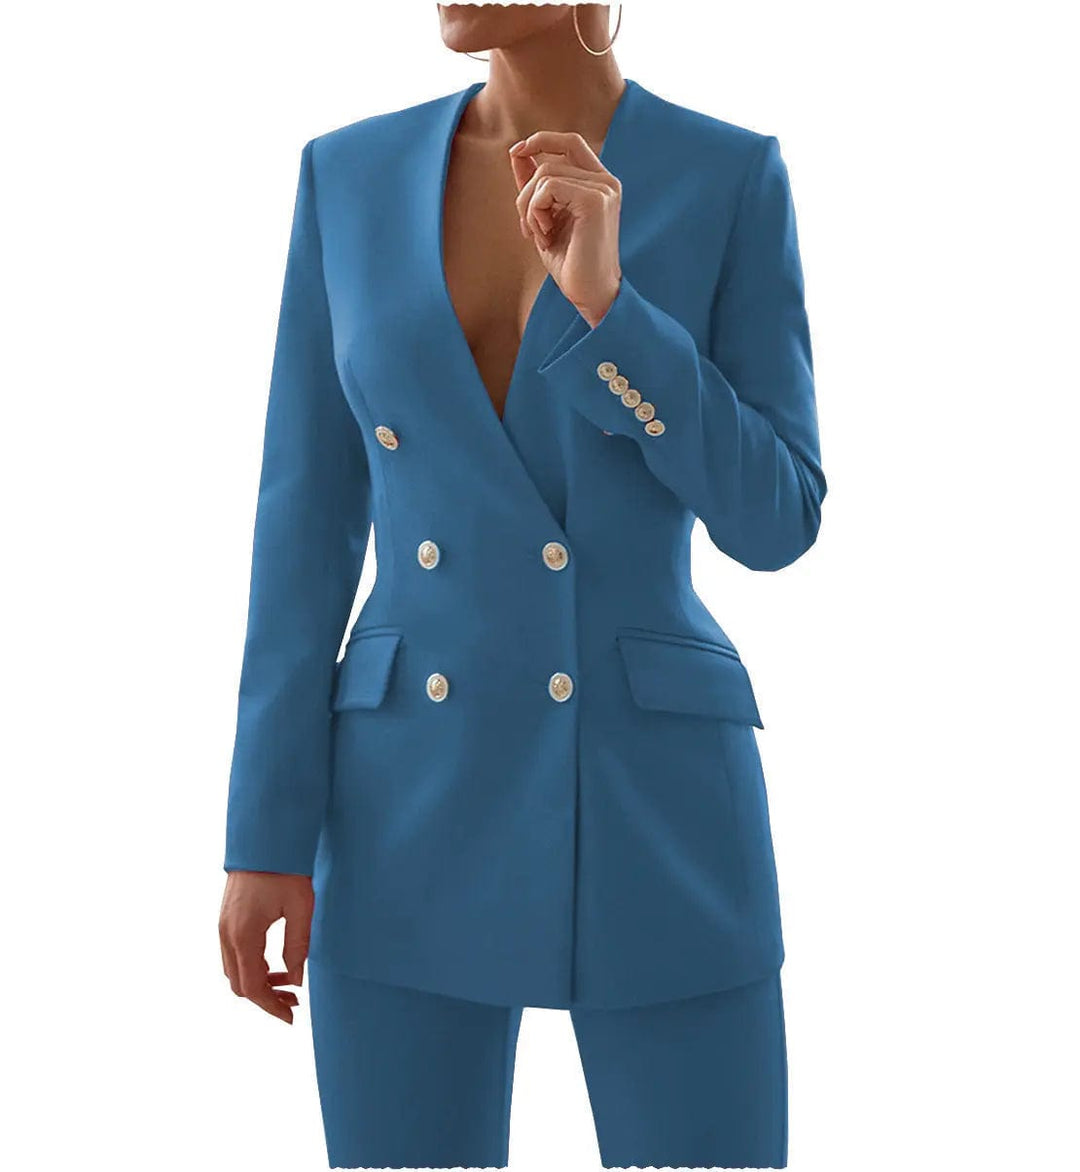 solovedress Double Breasted 6 Buttons V Neck Blazer 2 Pieces Women Suit